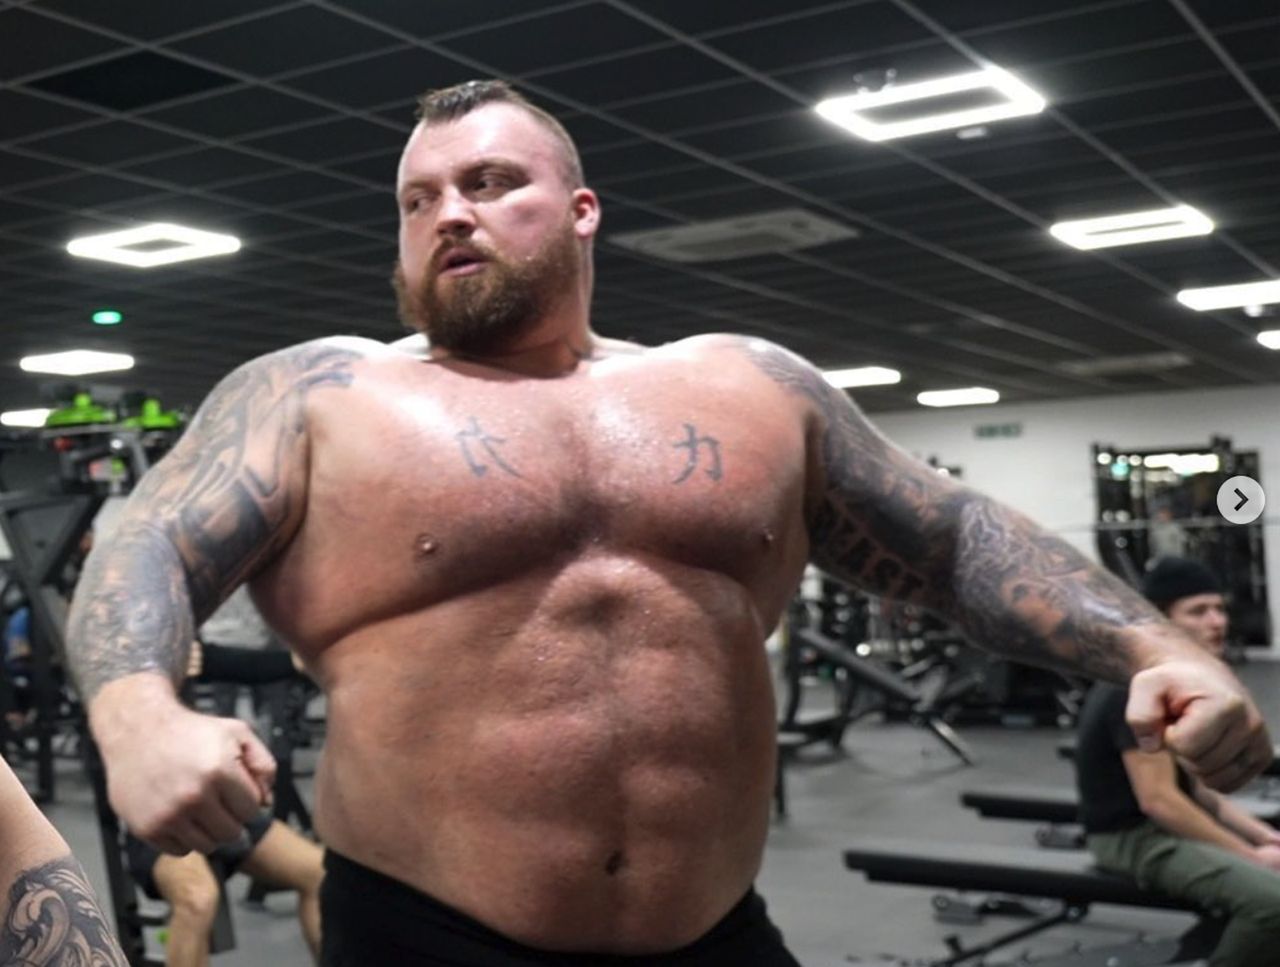 World's Strongest Man will fight in MMA. A potential cash prize is staggering